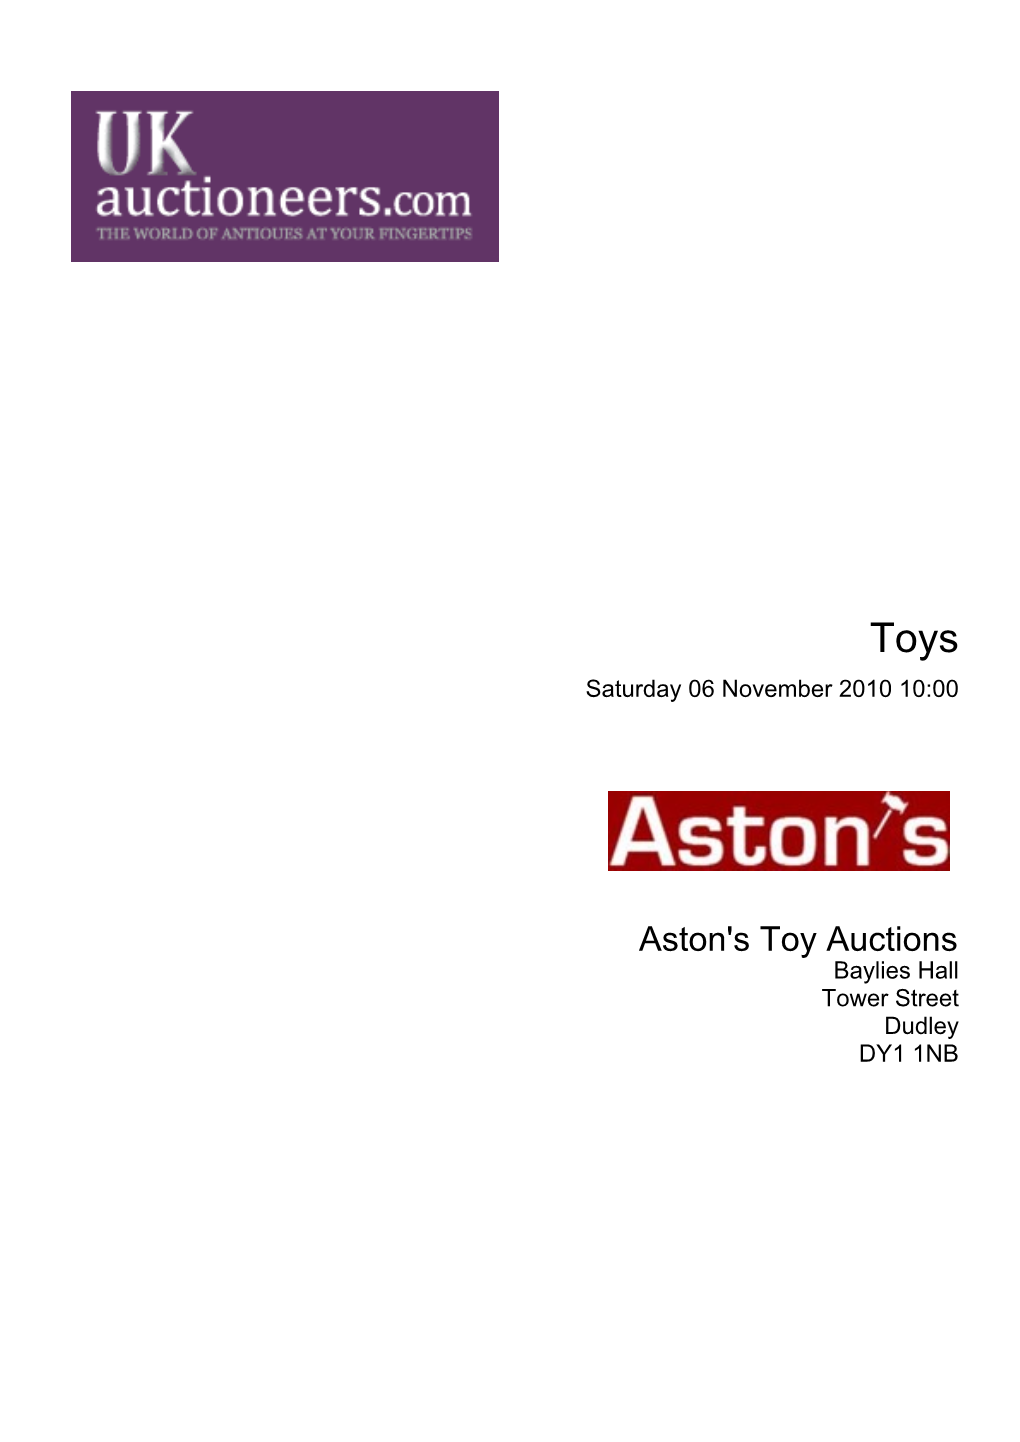 Aston's Toy Auctions Baylies Hall Tower Street Dudley DY1 1NB Aston's Toy Auctions (Toys) Catalogue - Downloaded from Ukauctioneers.Com